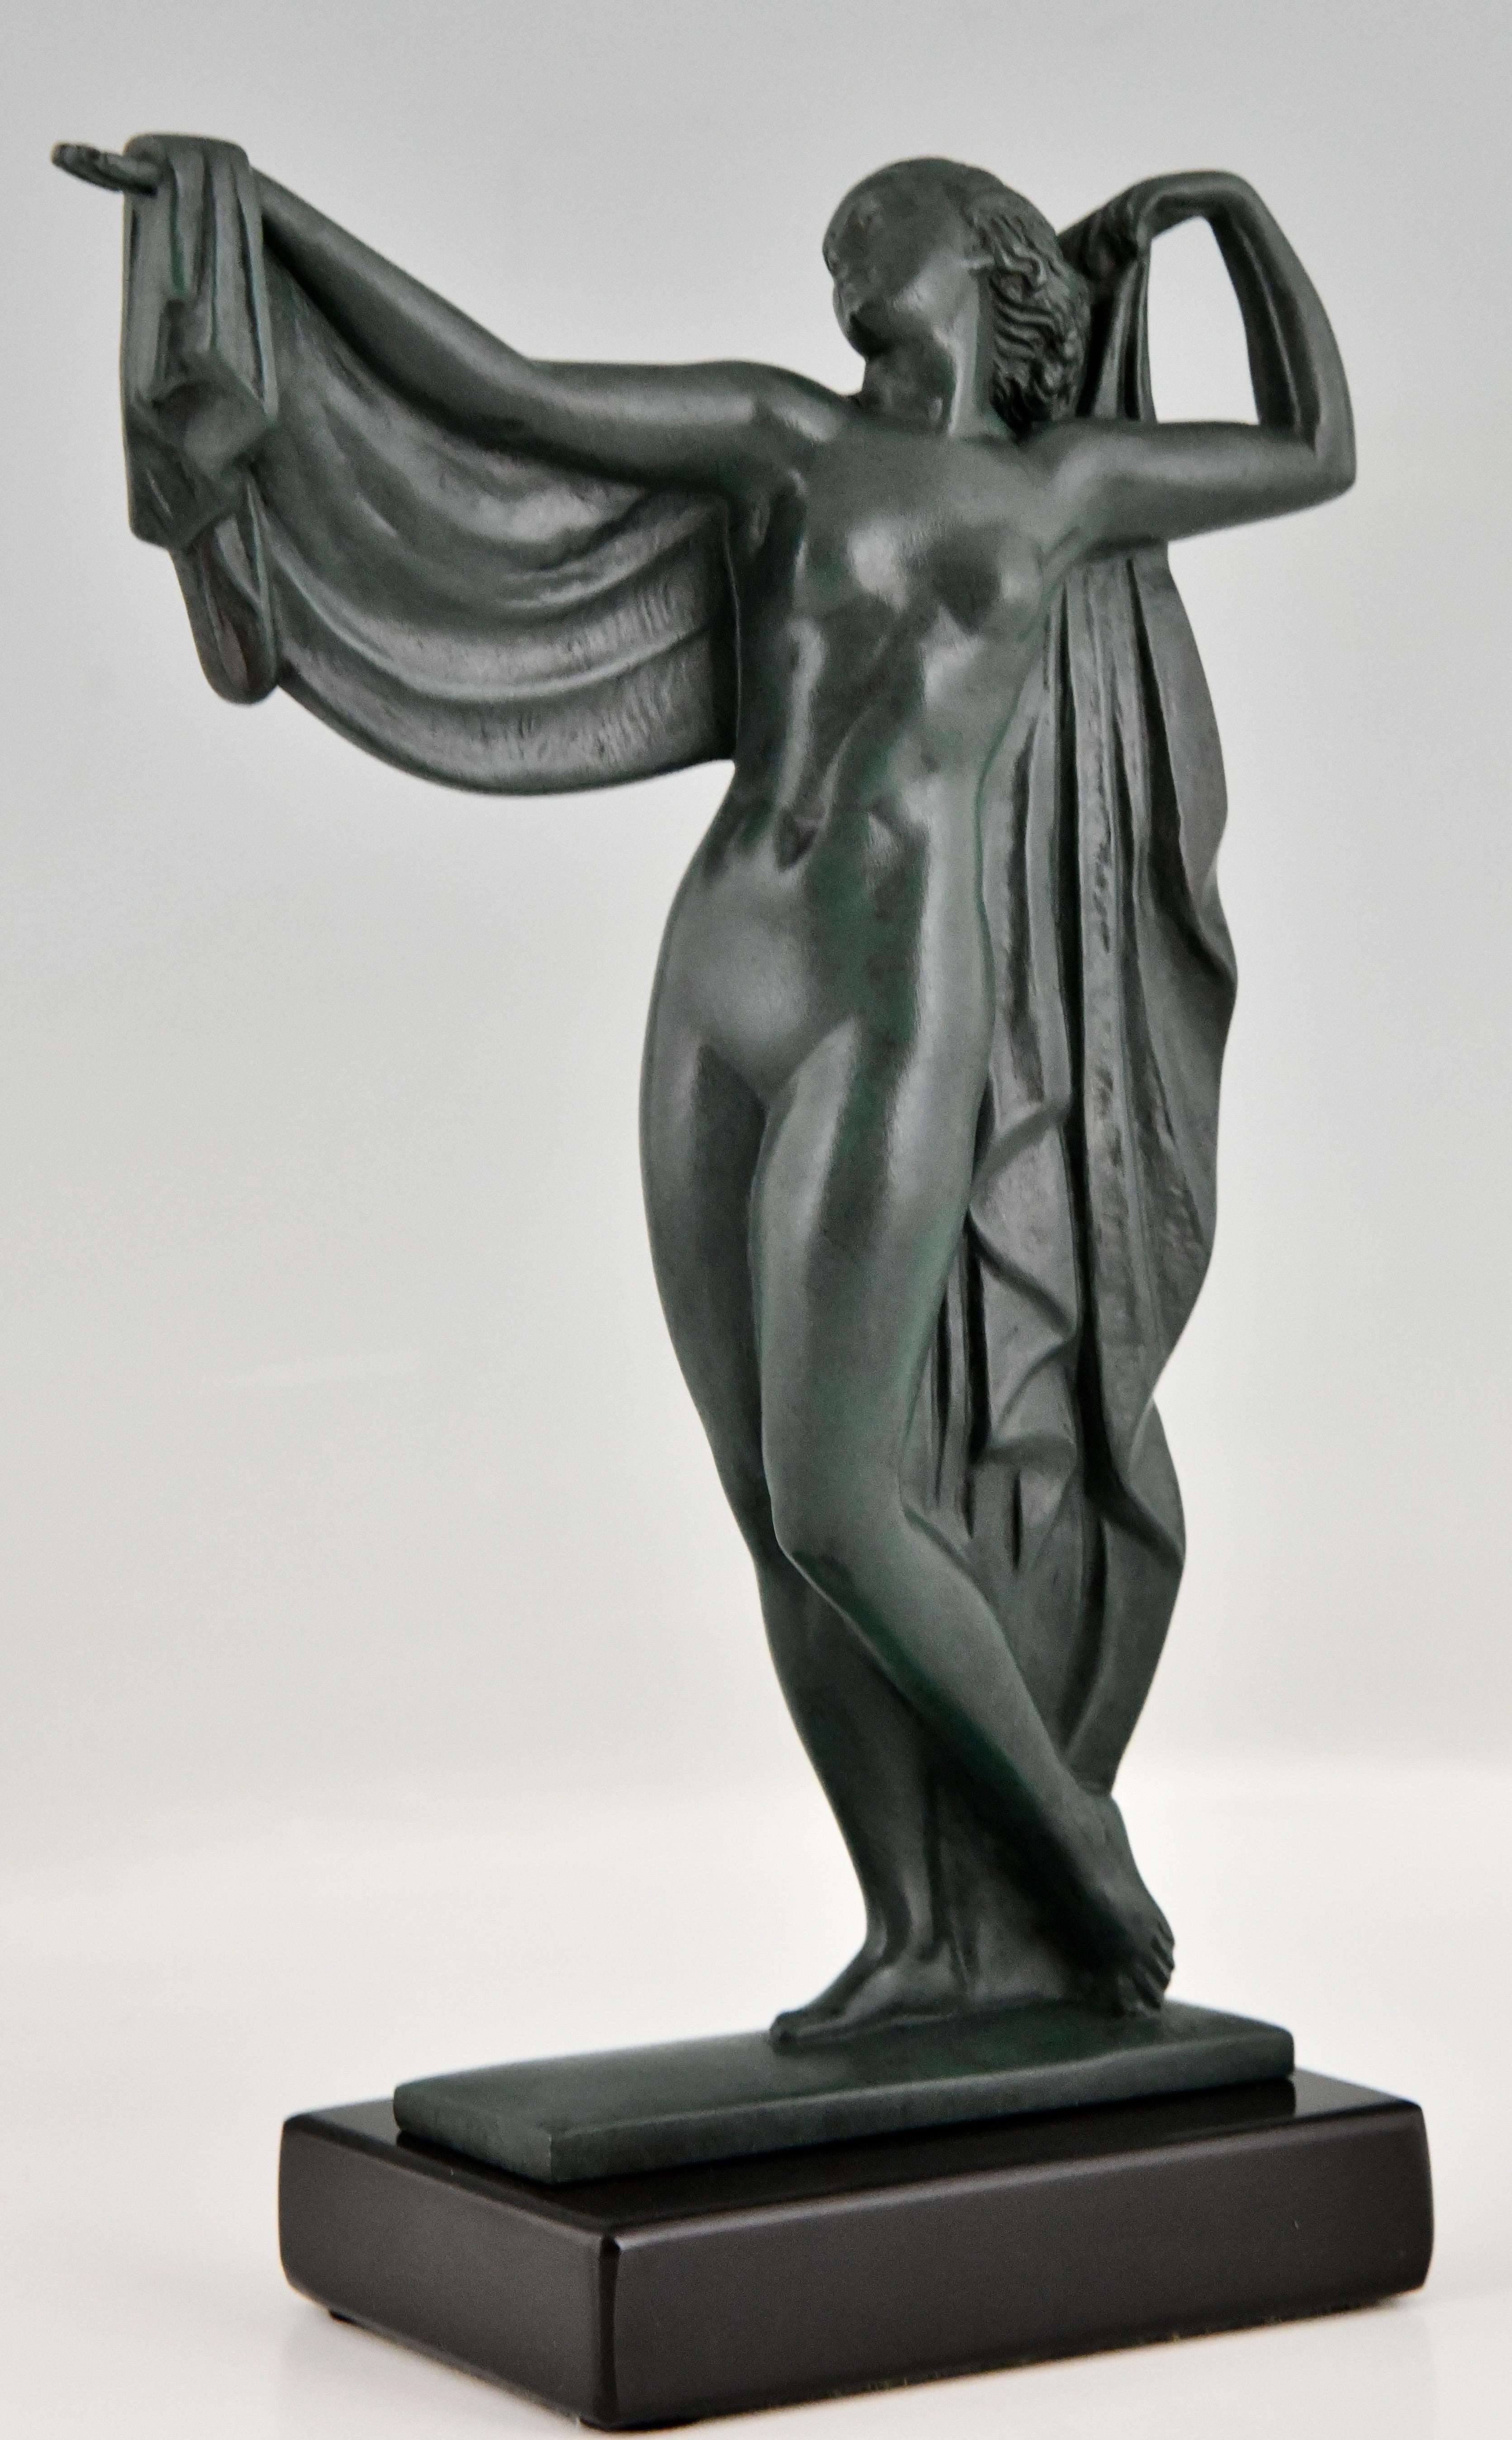 Art Deco sculpture bathing nude Venus by Fayral pseudonym of Pierre Le Faguays, cast by the Le Verrier foundry.
Art Metal with green patina on a Belgian black marble plinth. 
France circa 1930.
This model is illustrated in the Max Le Verrier